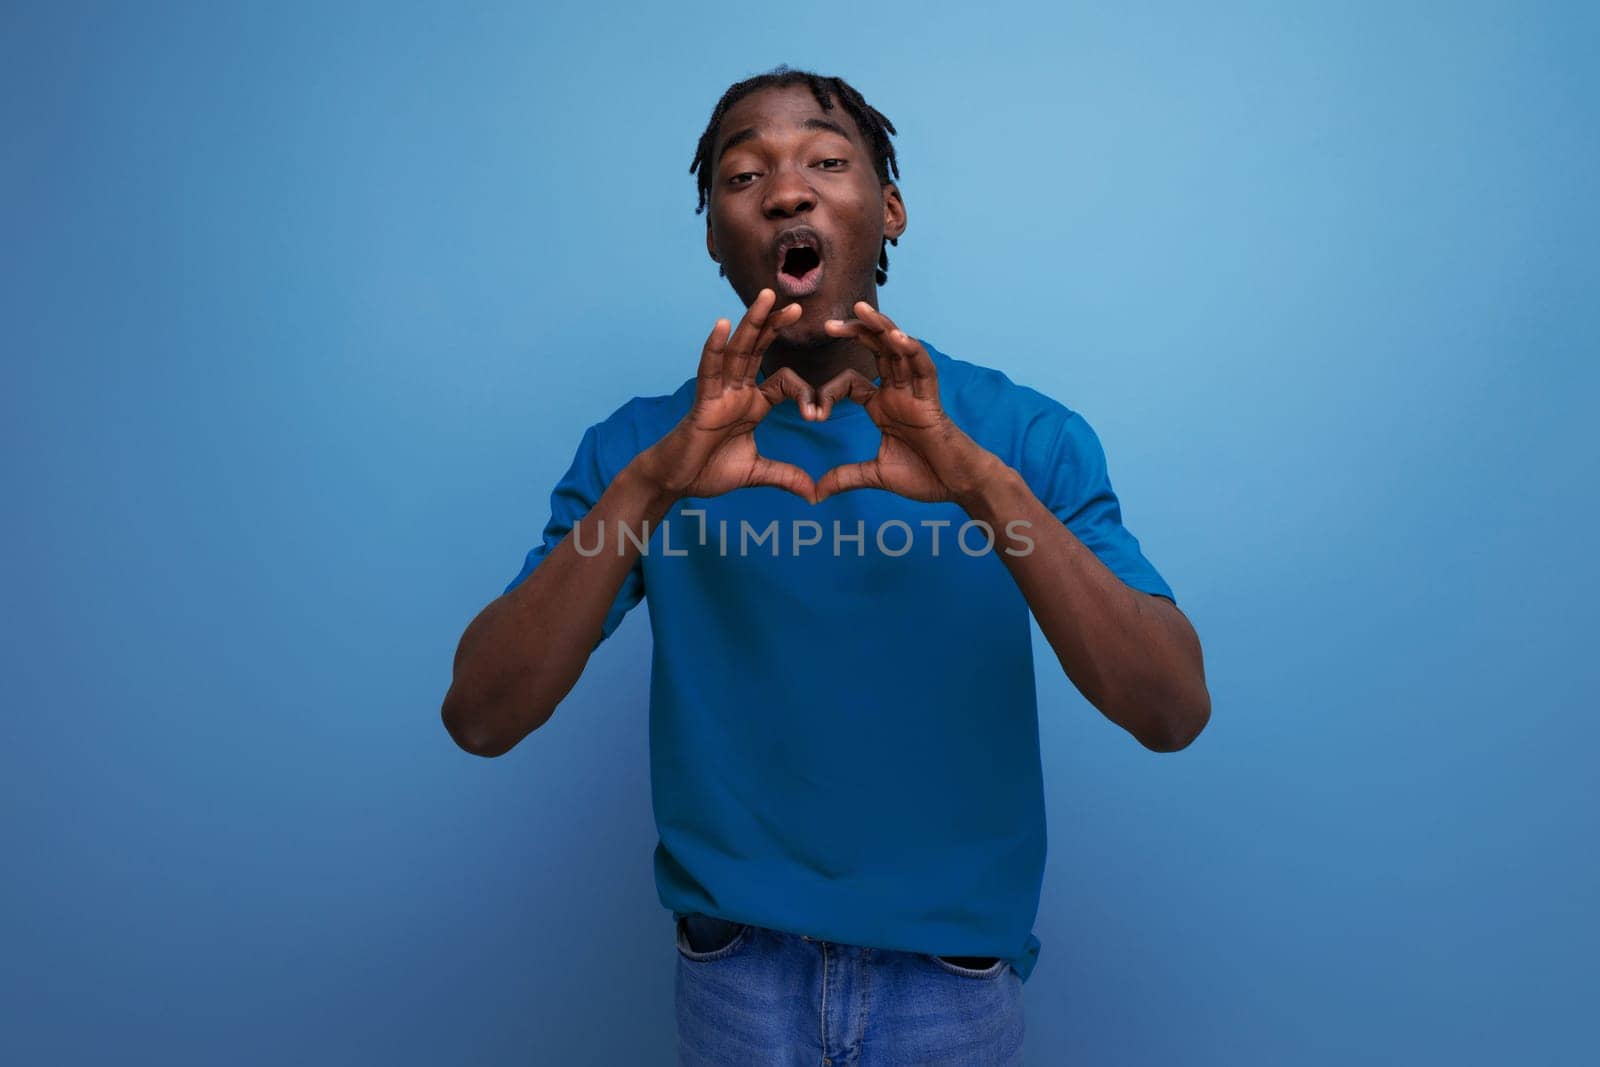 kind loving american young man with dreadlocks in a casual t-shirt against the background with copy space.